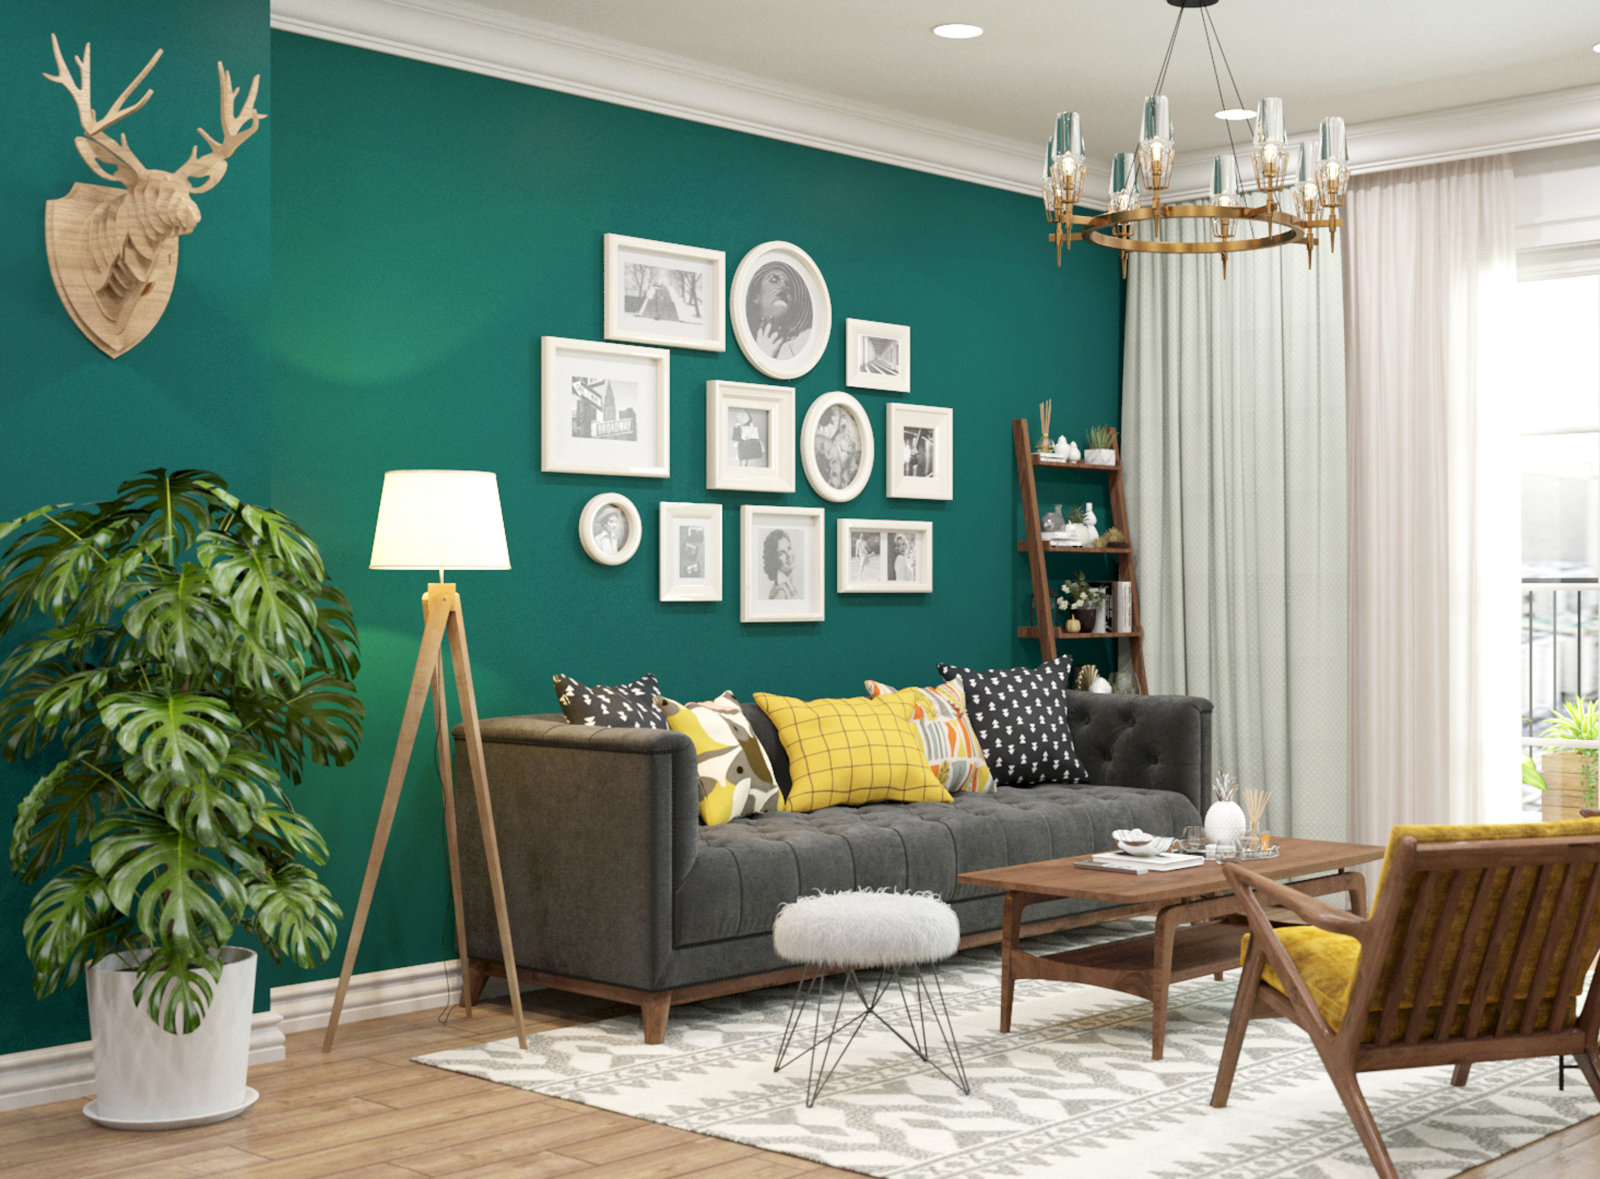 Mid-Century Modern living room by Ashley Vy Nguyen on Dribbble